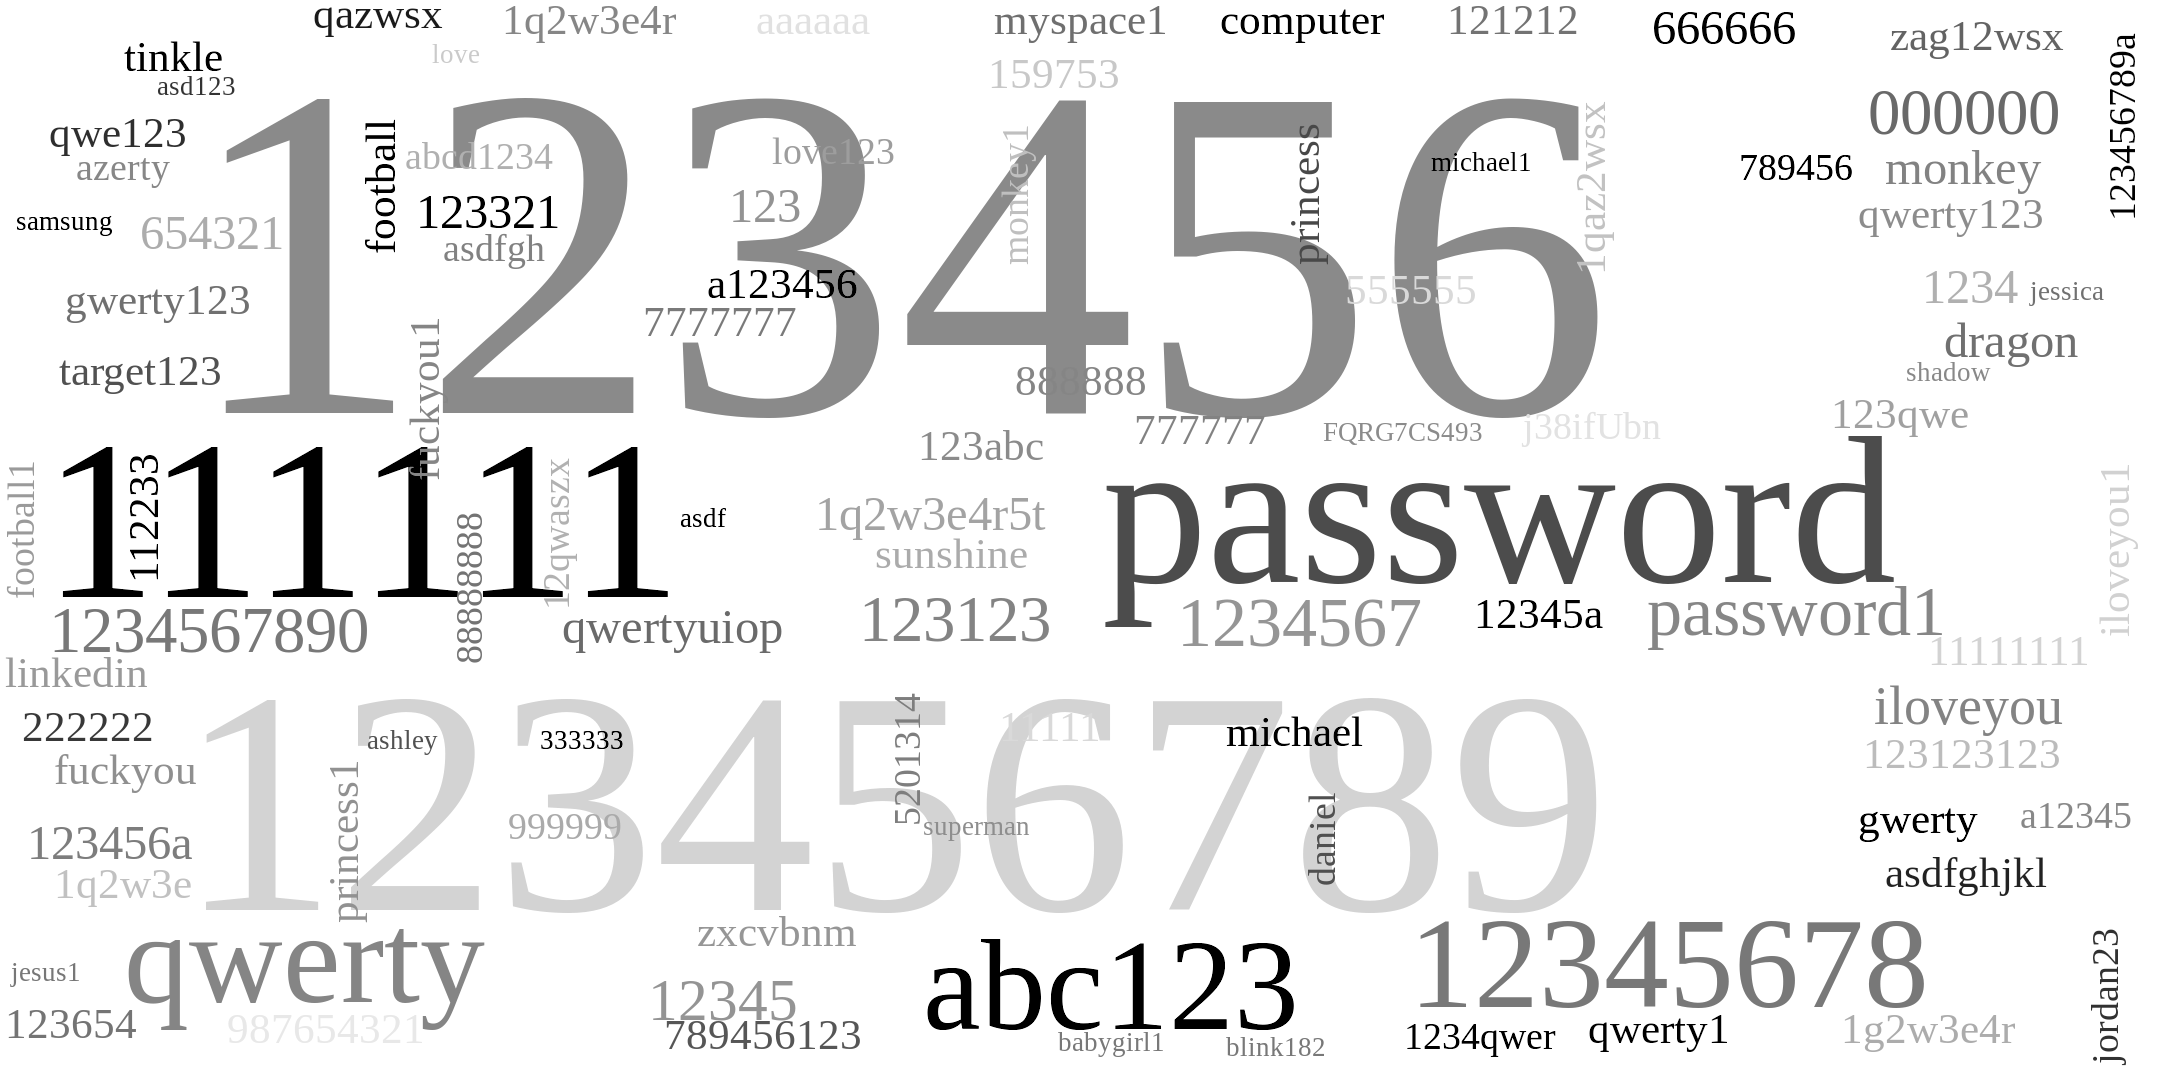 Word cloud illustrating the 100 most popular passwords and their frequencies.